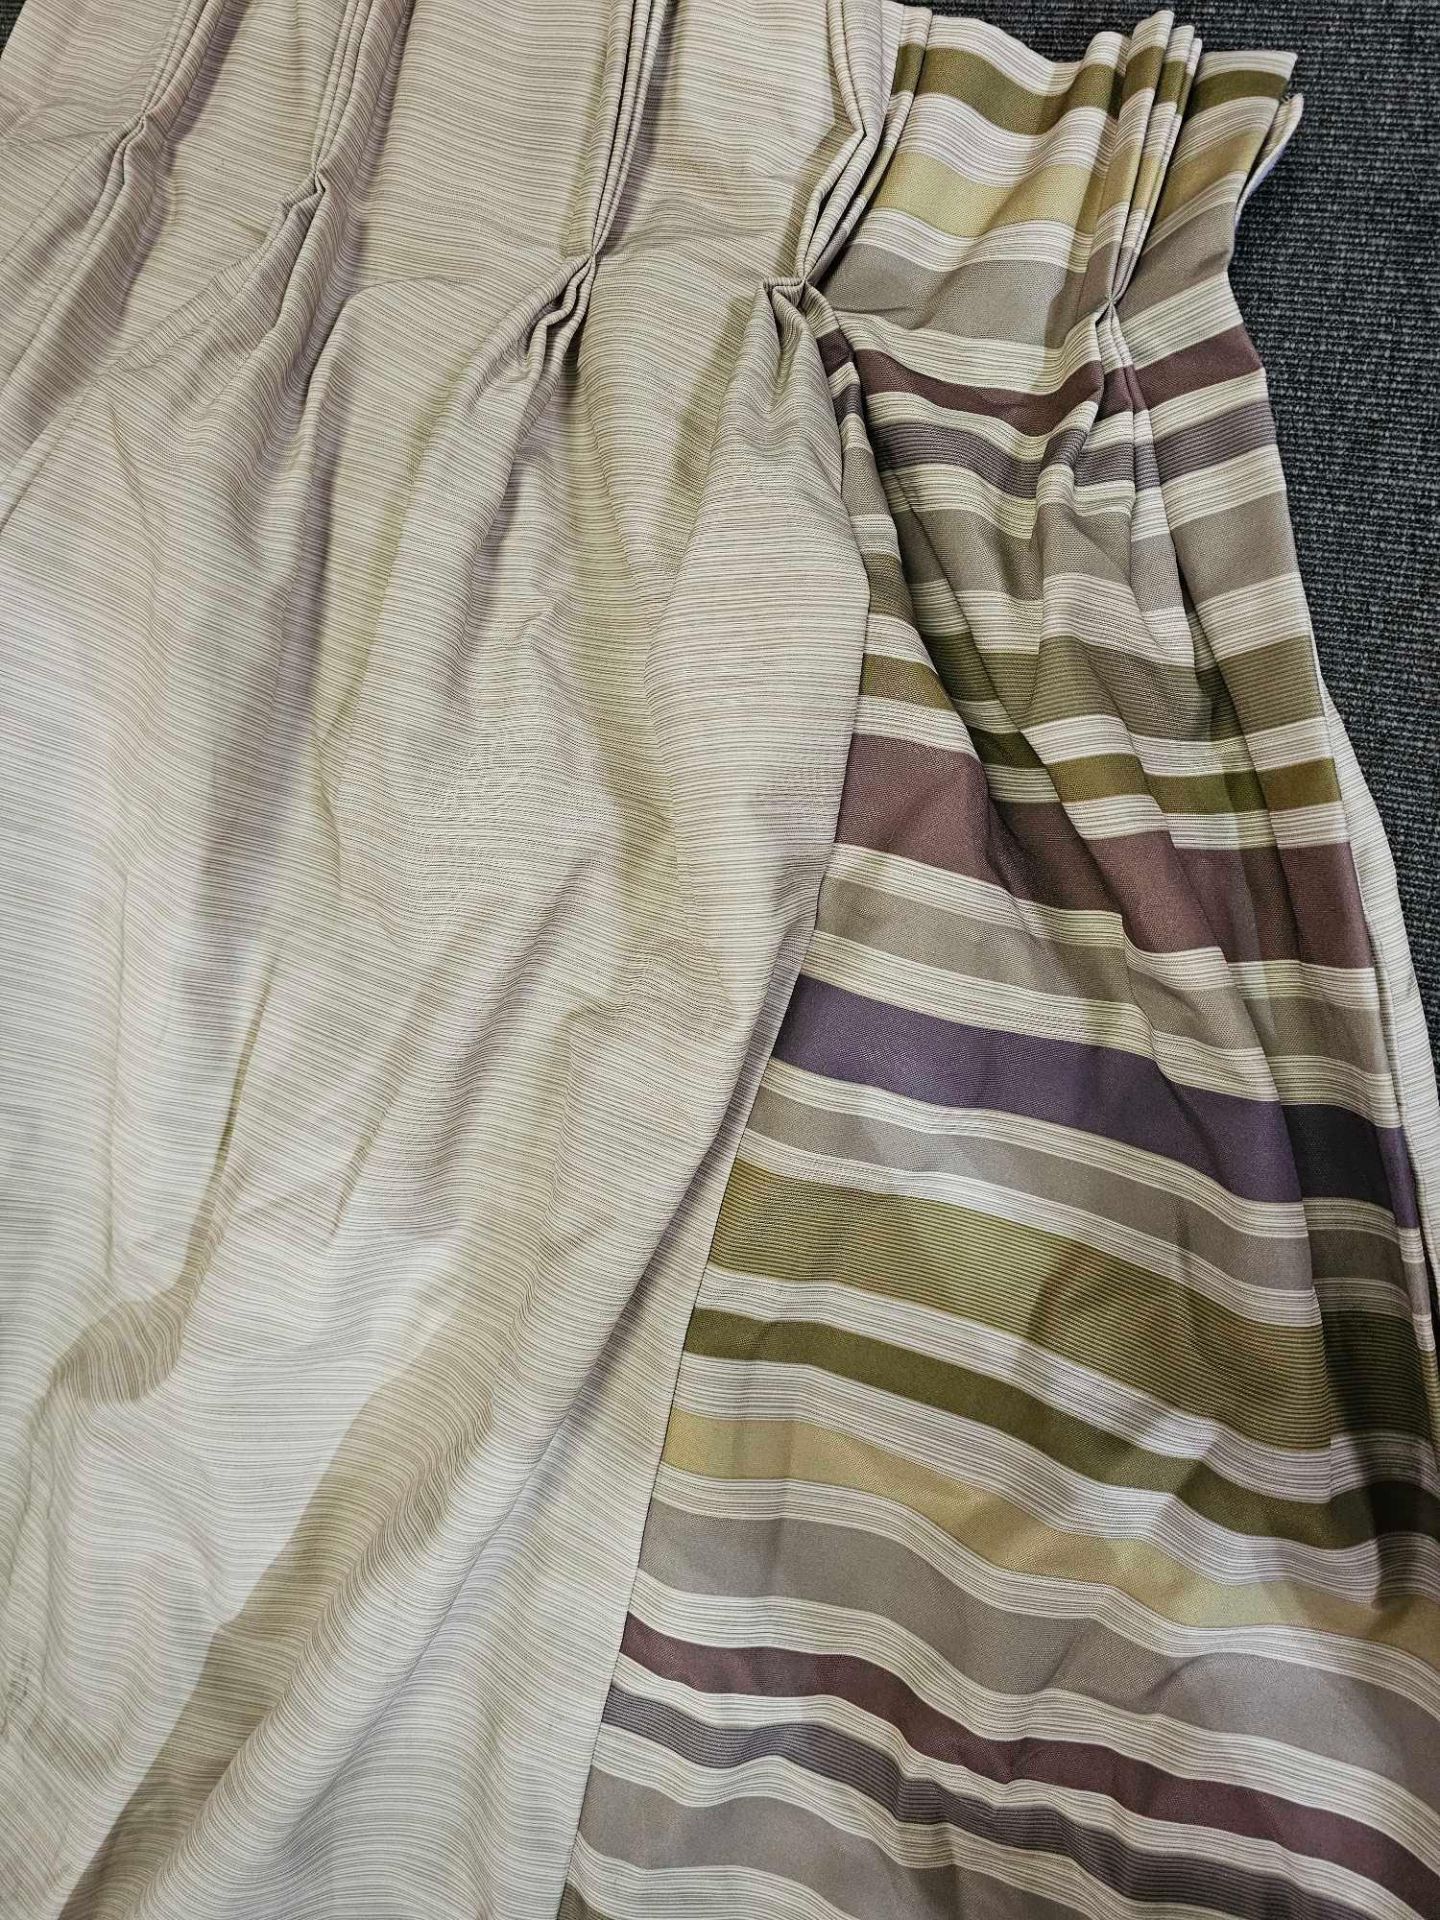 A Pair Of Curtains Striped Edge Purple/Green/Beige/Lime/Brown Size 284 x 250cm ( Ref Red 161) - Image 2 of 2